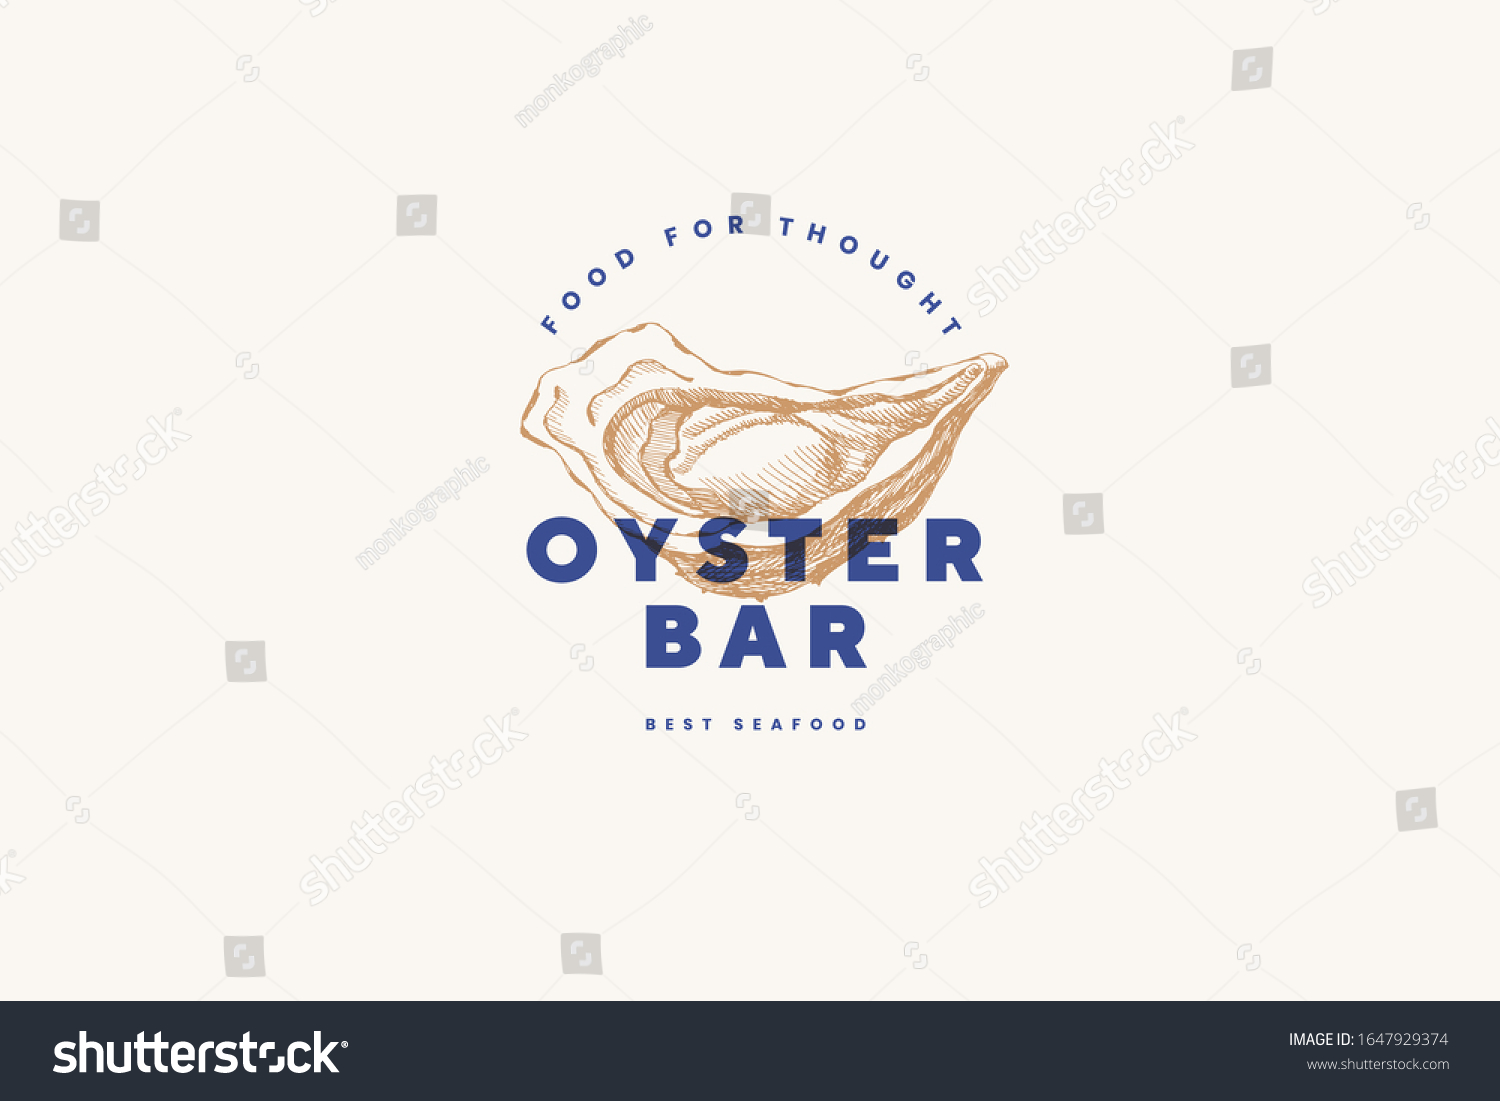 685 Oyster bar sign Images, Stock Photos & Vectors | Shutterstock